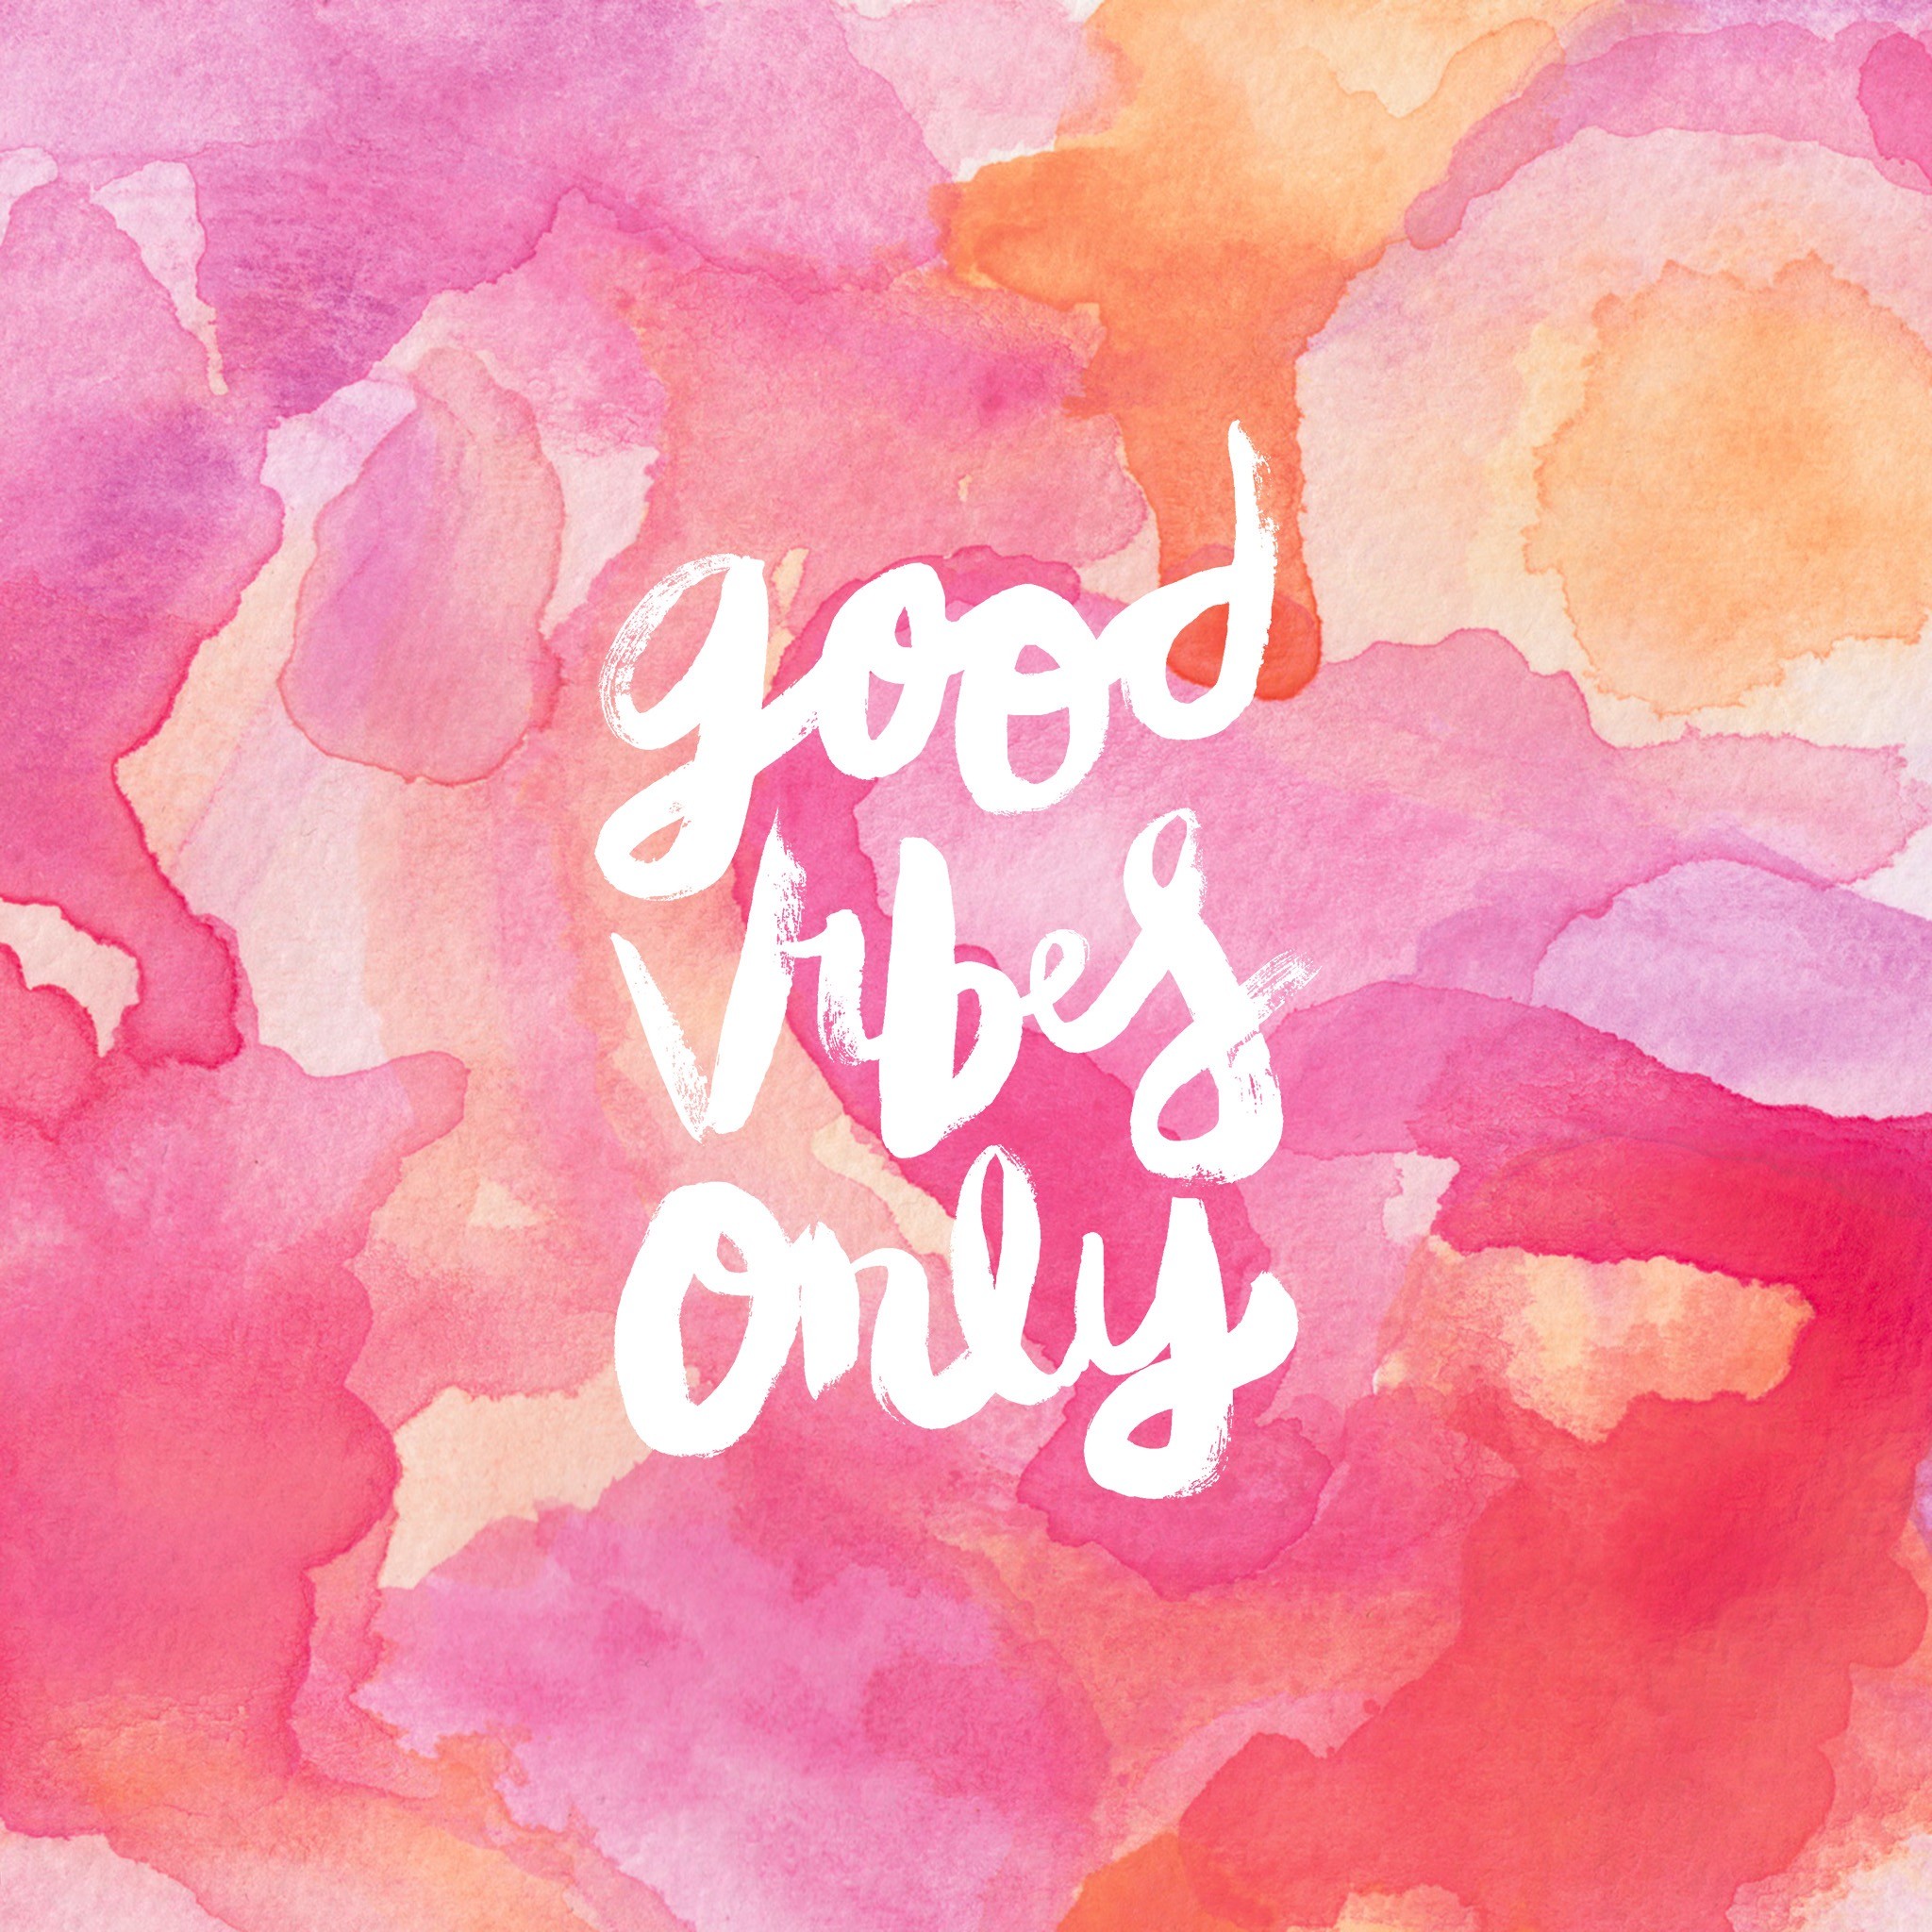 Motivational And Inspirational Quotes Iphone Cell Phone - Good Vibes Only Cute - HD Wallpaper 